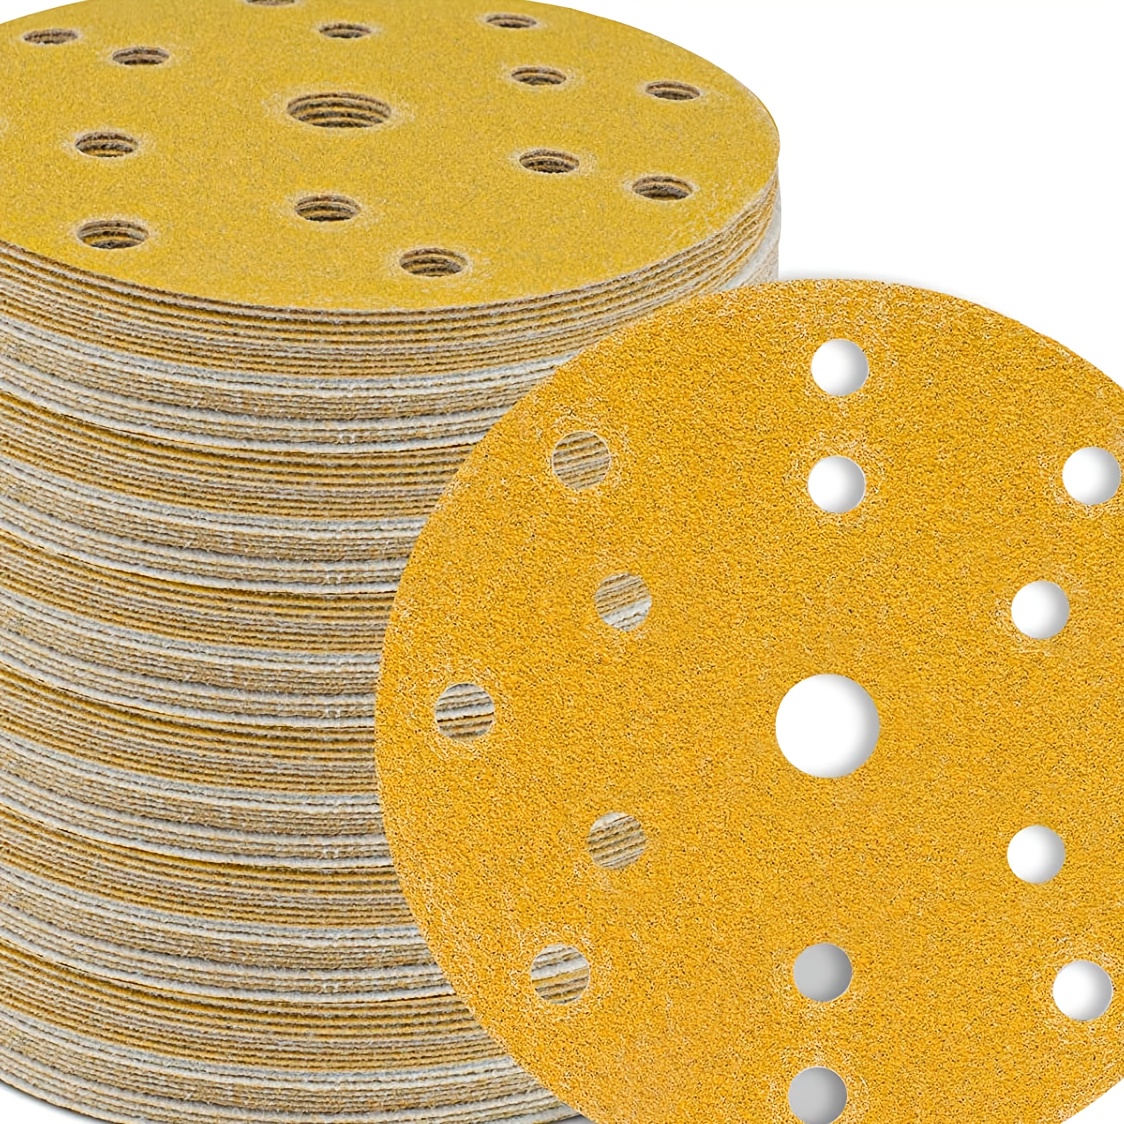 

Stebruam 150mm Sanding Discs, Hook And Loop 60/80/120/180/400 Grits 15 Hole 6inch Round Sanding Discs Pads For Random Orbital Sander Pads And All Oscillating Tools